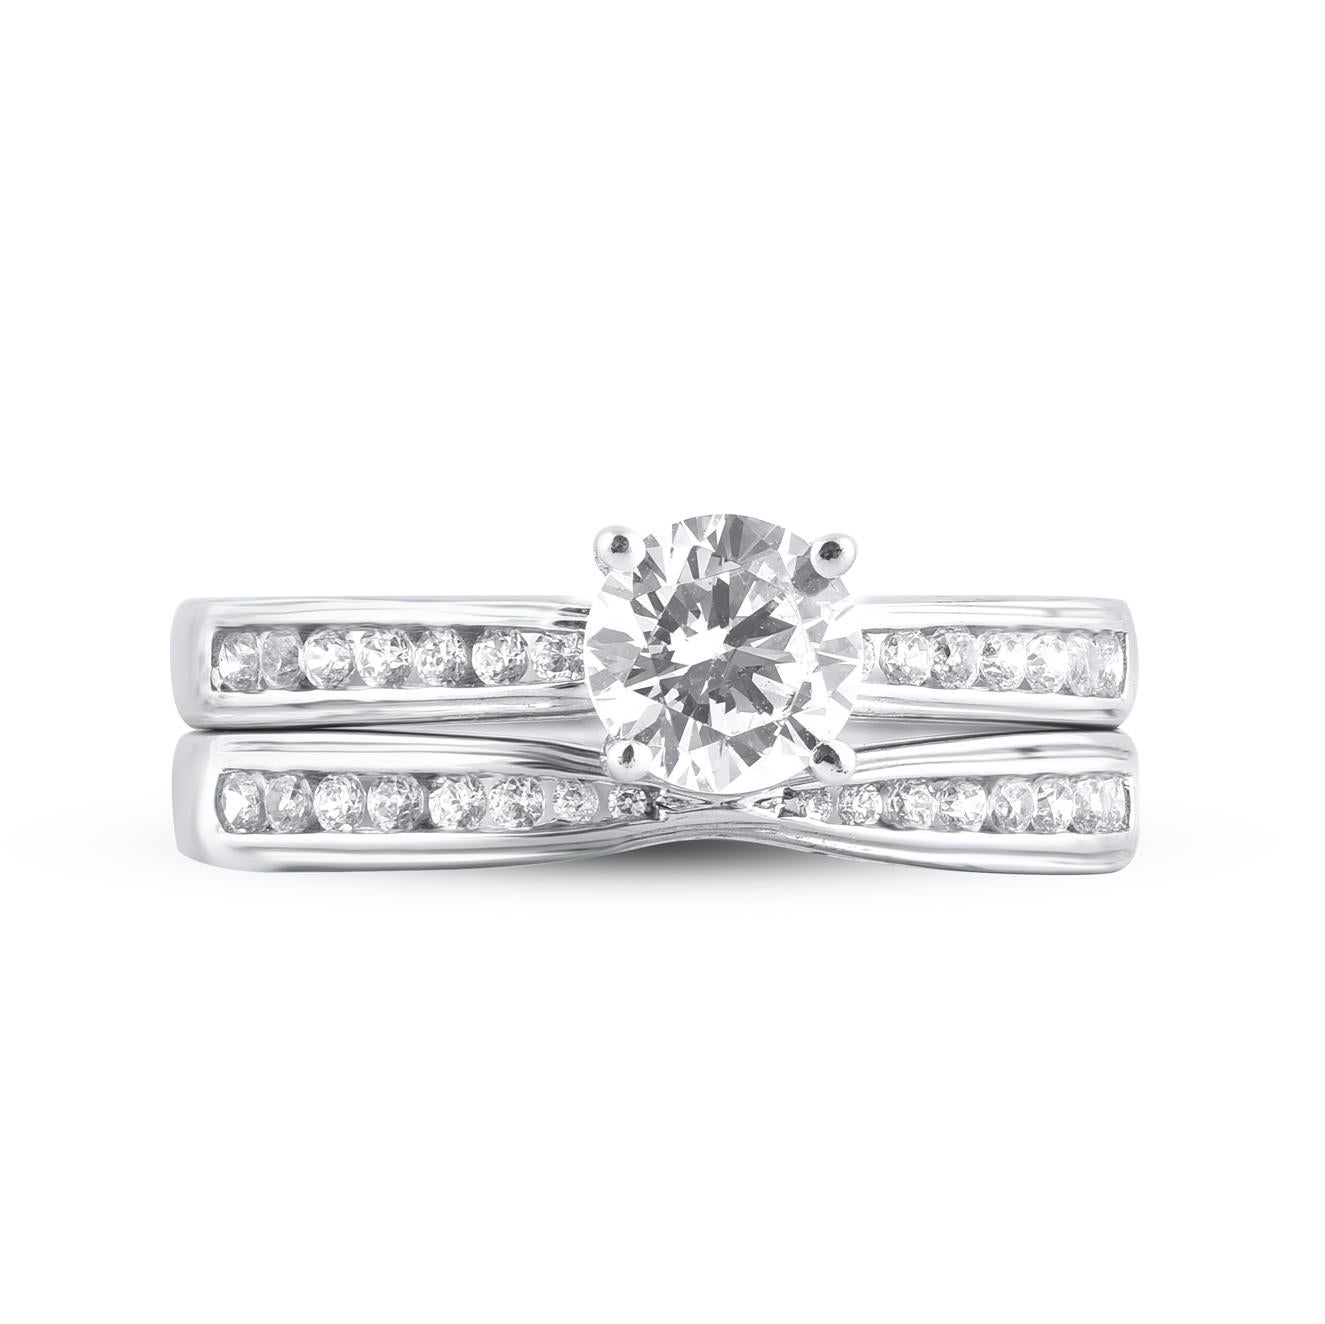 Express your love with this classic and traditional diamond bridal set. Crafted in 14 Karat white gold. This wedding ring features a sparkling 31 brilliant cut and single cut round diamonds beautifully set in prong and channel setting. The total